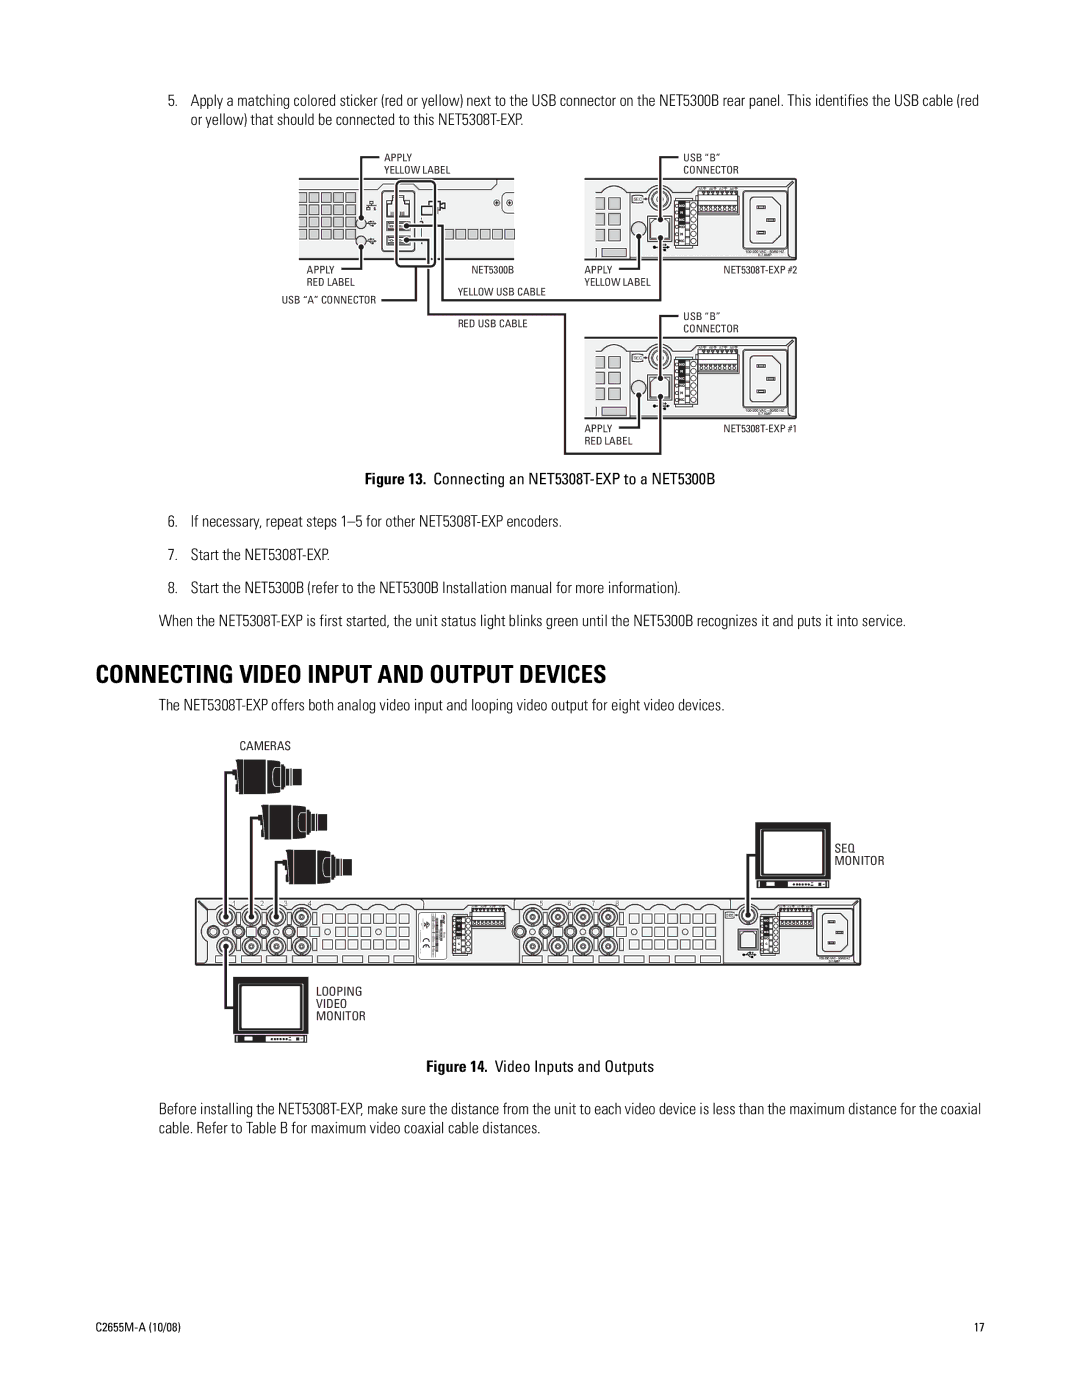 Pelco NET5308T-EXP manual Connecting Video Input and Output Devices 